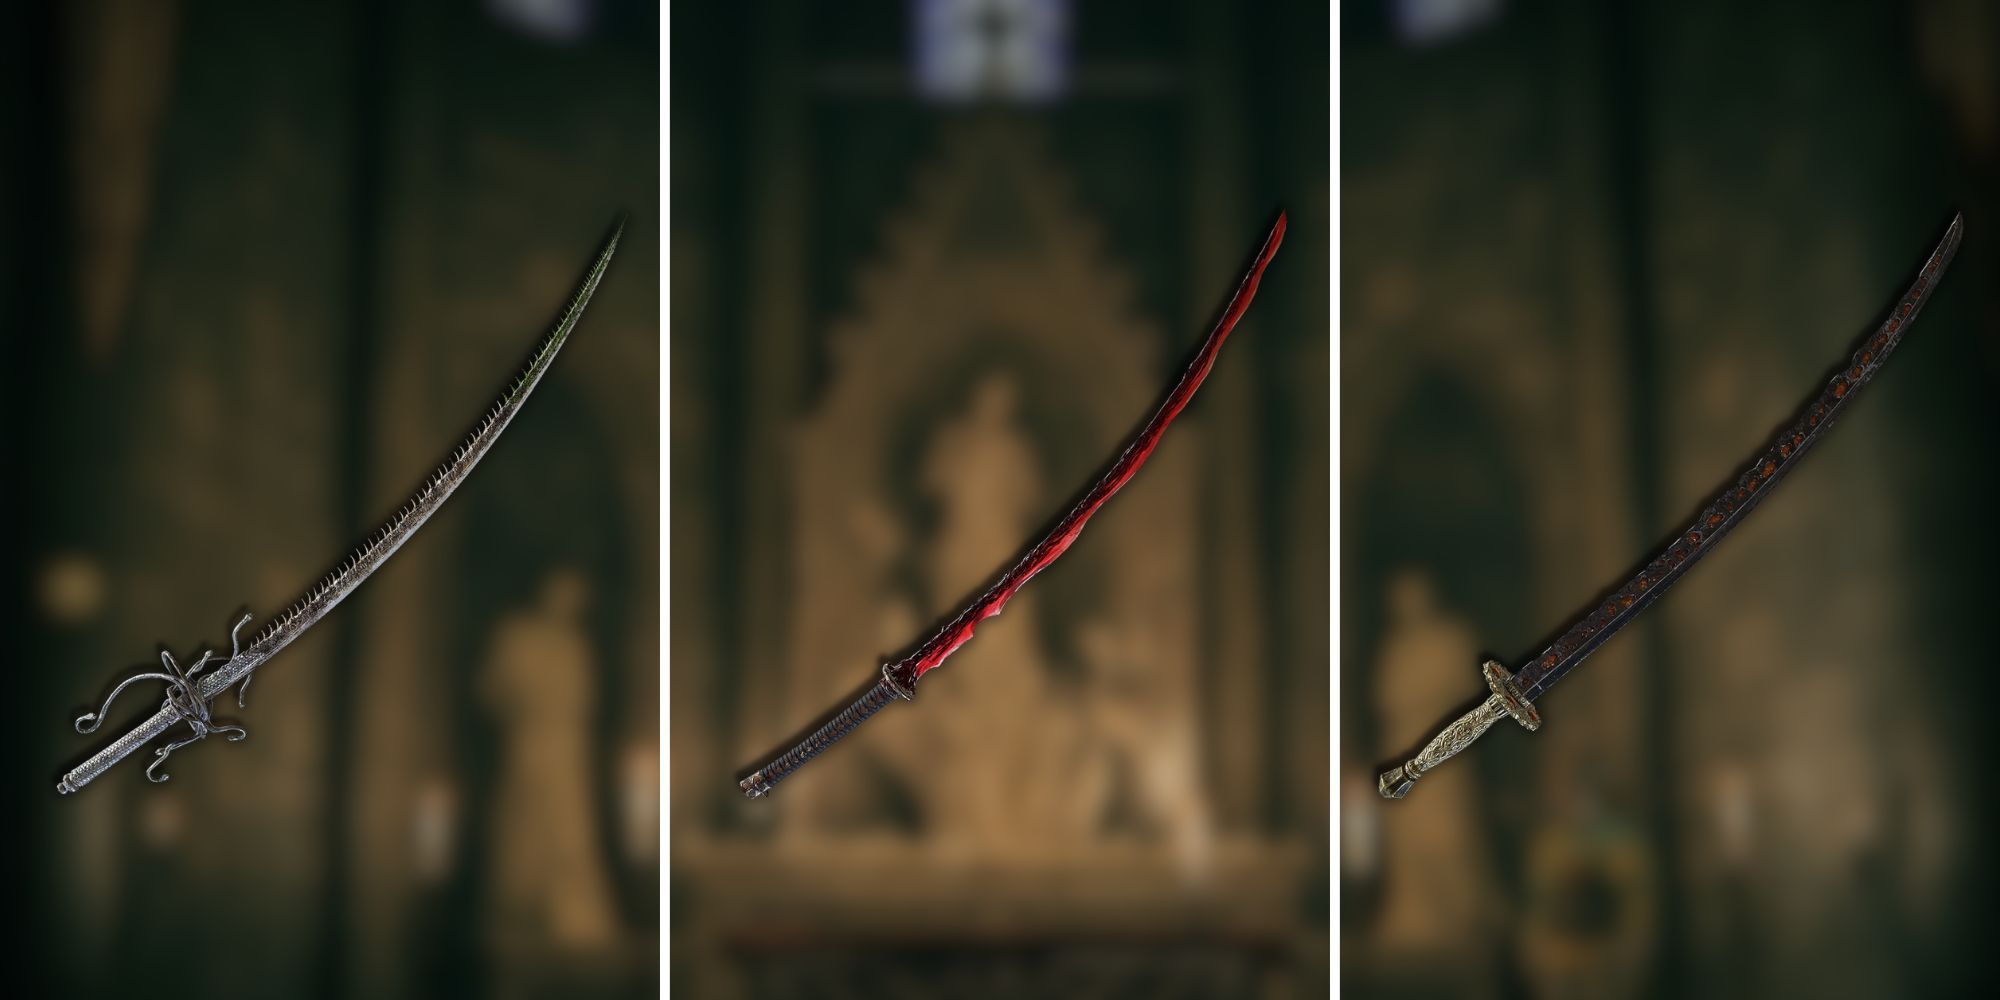 HOW TO GET/OBTAIN EVERY OBTAINABLE SWORD